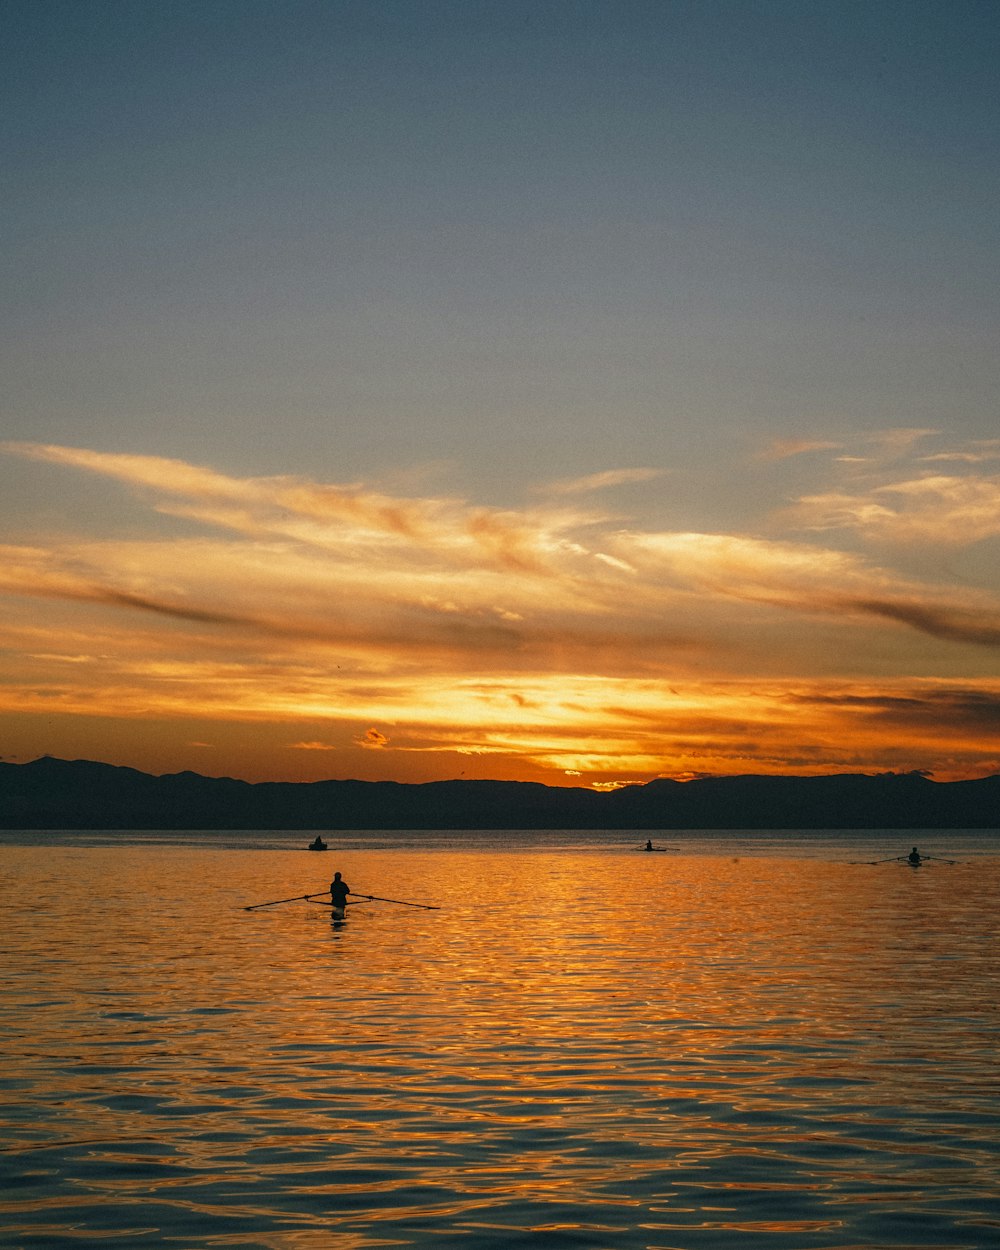 a person rowing a boat in the water at sunset